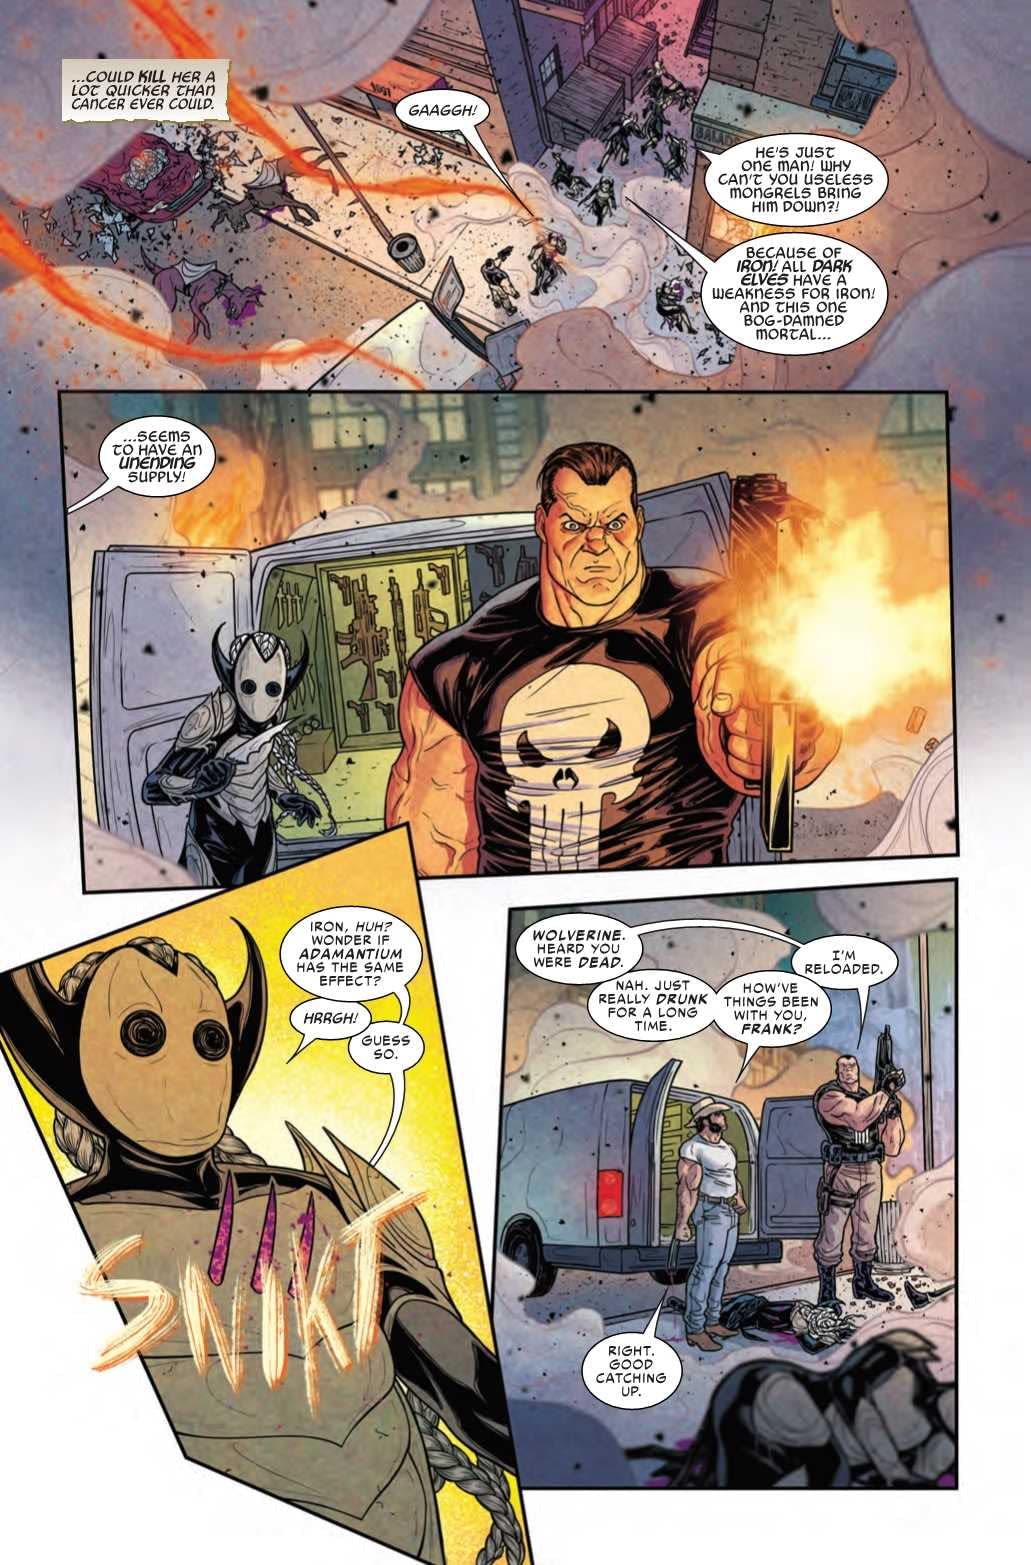 Will Jane Foster Become Thor Again? War of the Realms #2 Preview